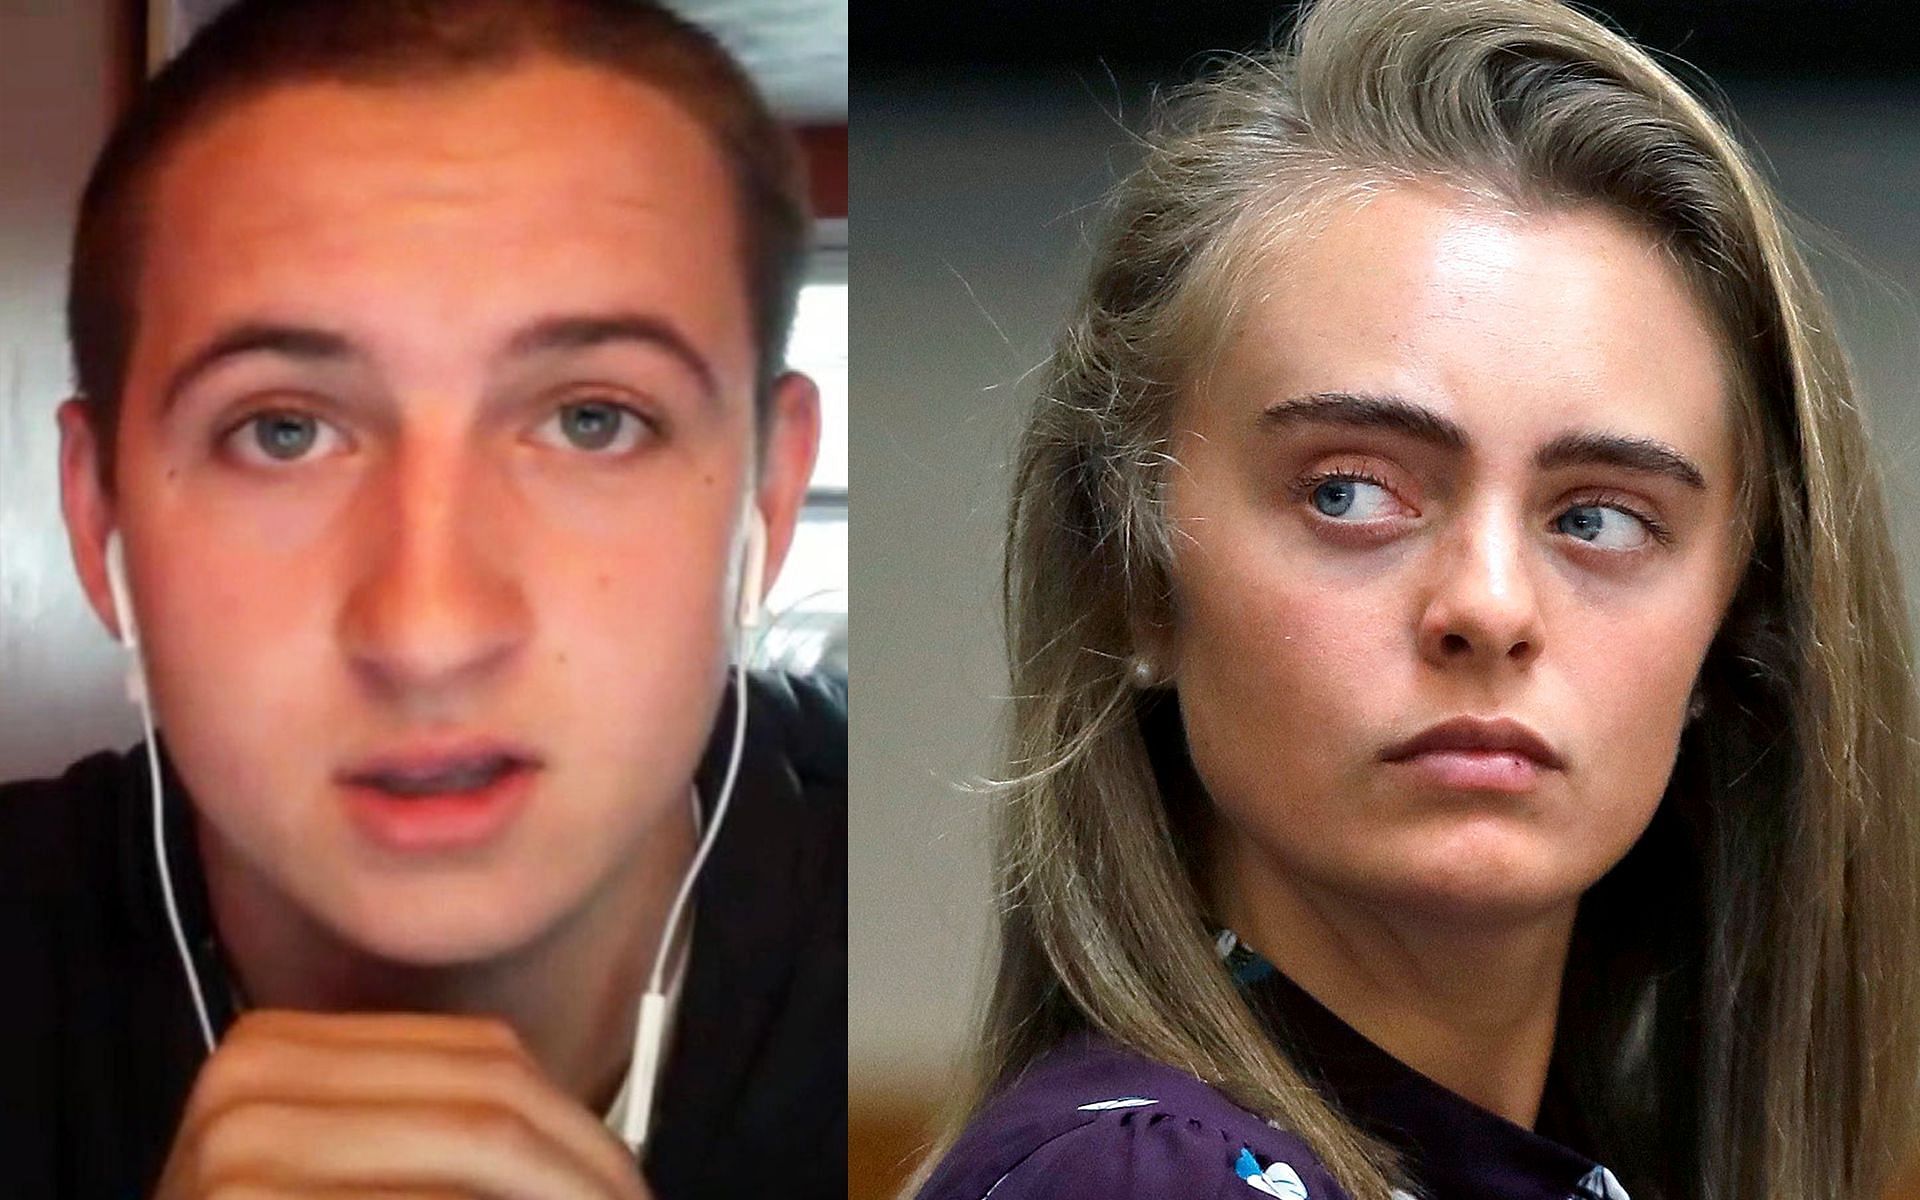 Conrad Roy III and Michelle Carter&#039;s relationship (Image via CBS News)